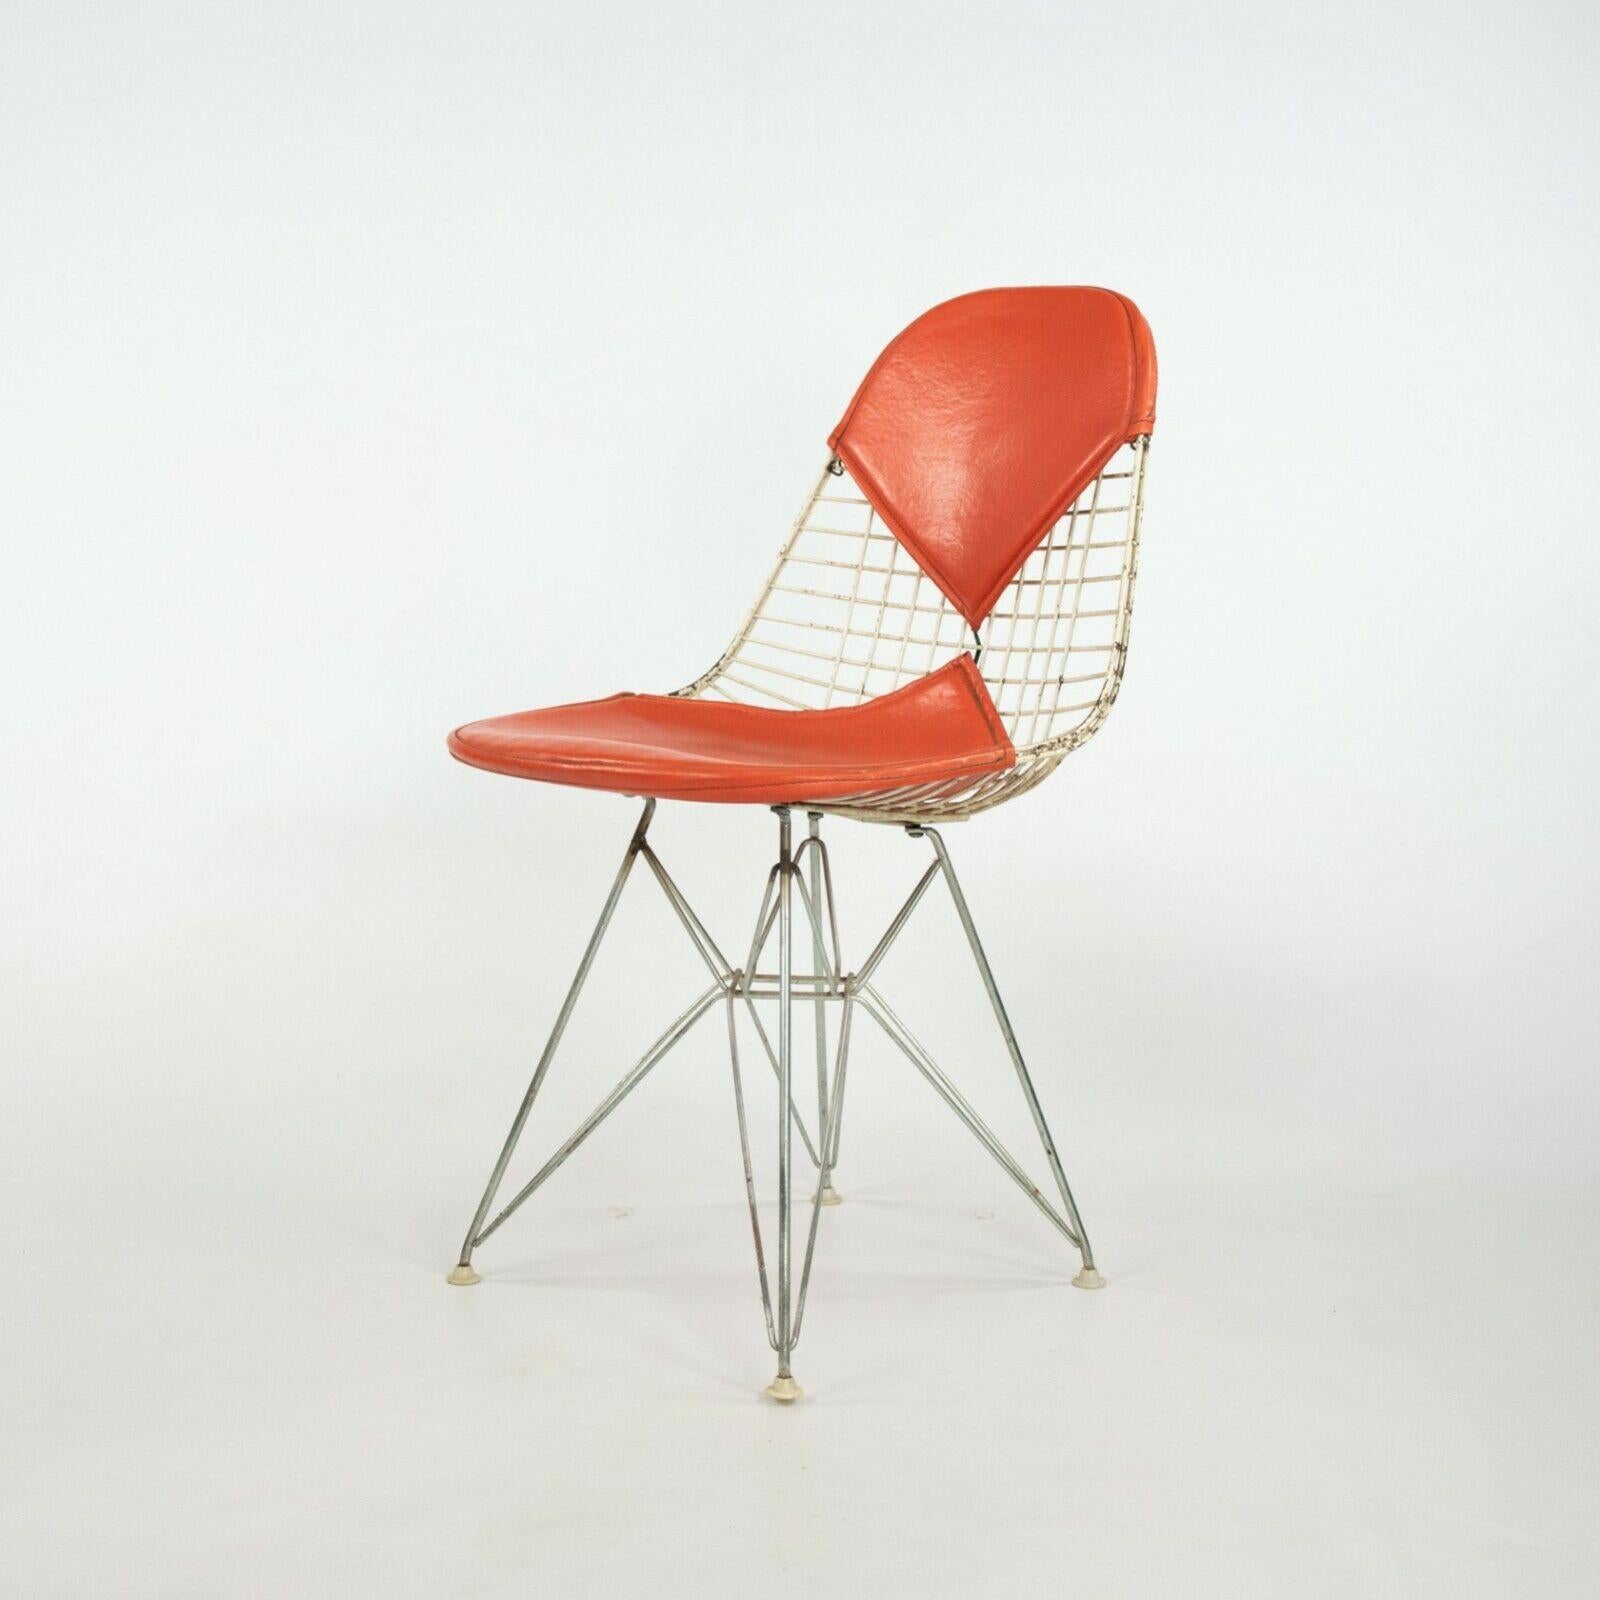 Modern 1957 Herman Miller Eames DKR-2 Dining / Side Chairs Set of Five with Orange Pads For Sale